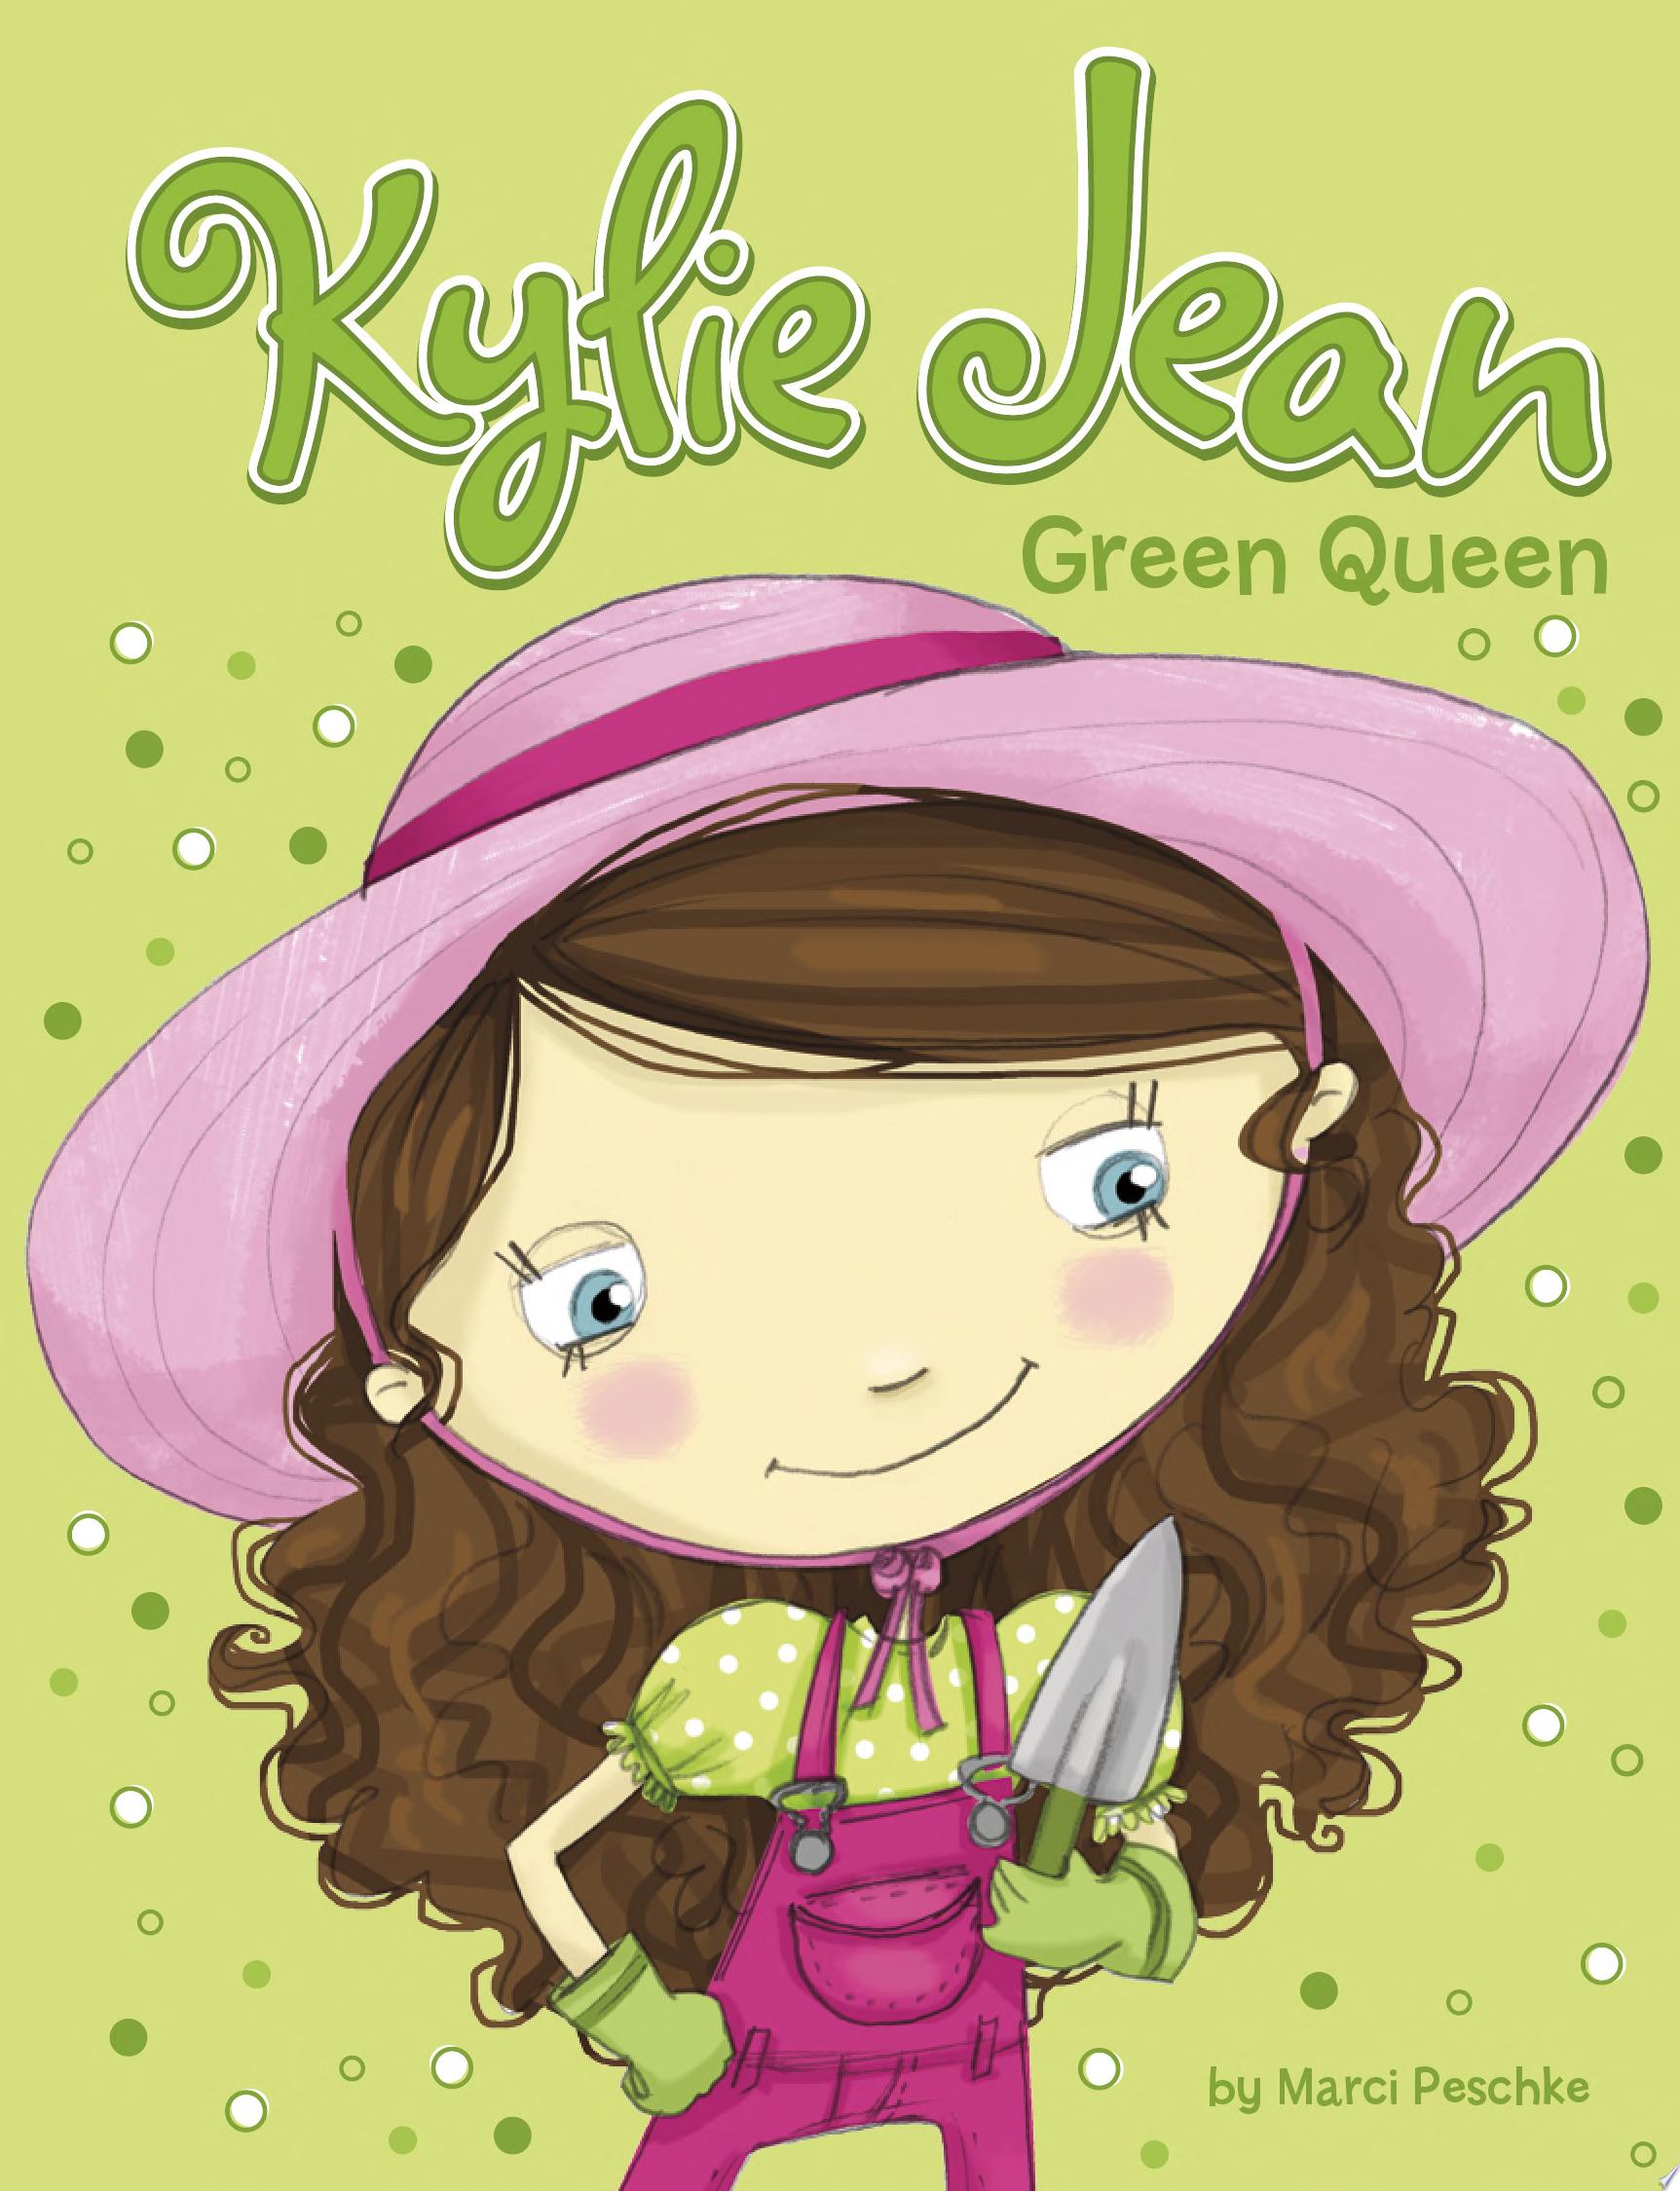 Image for "Kylie Jean, Green Queen"